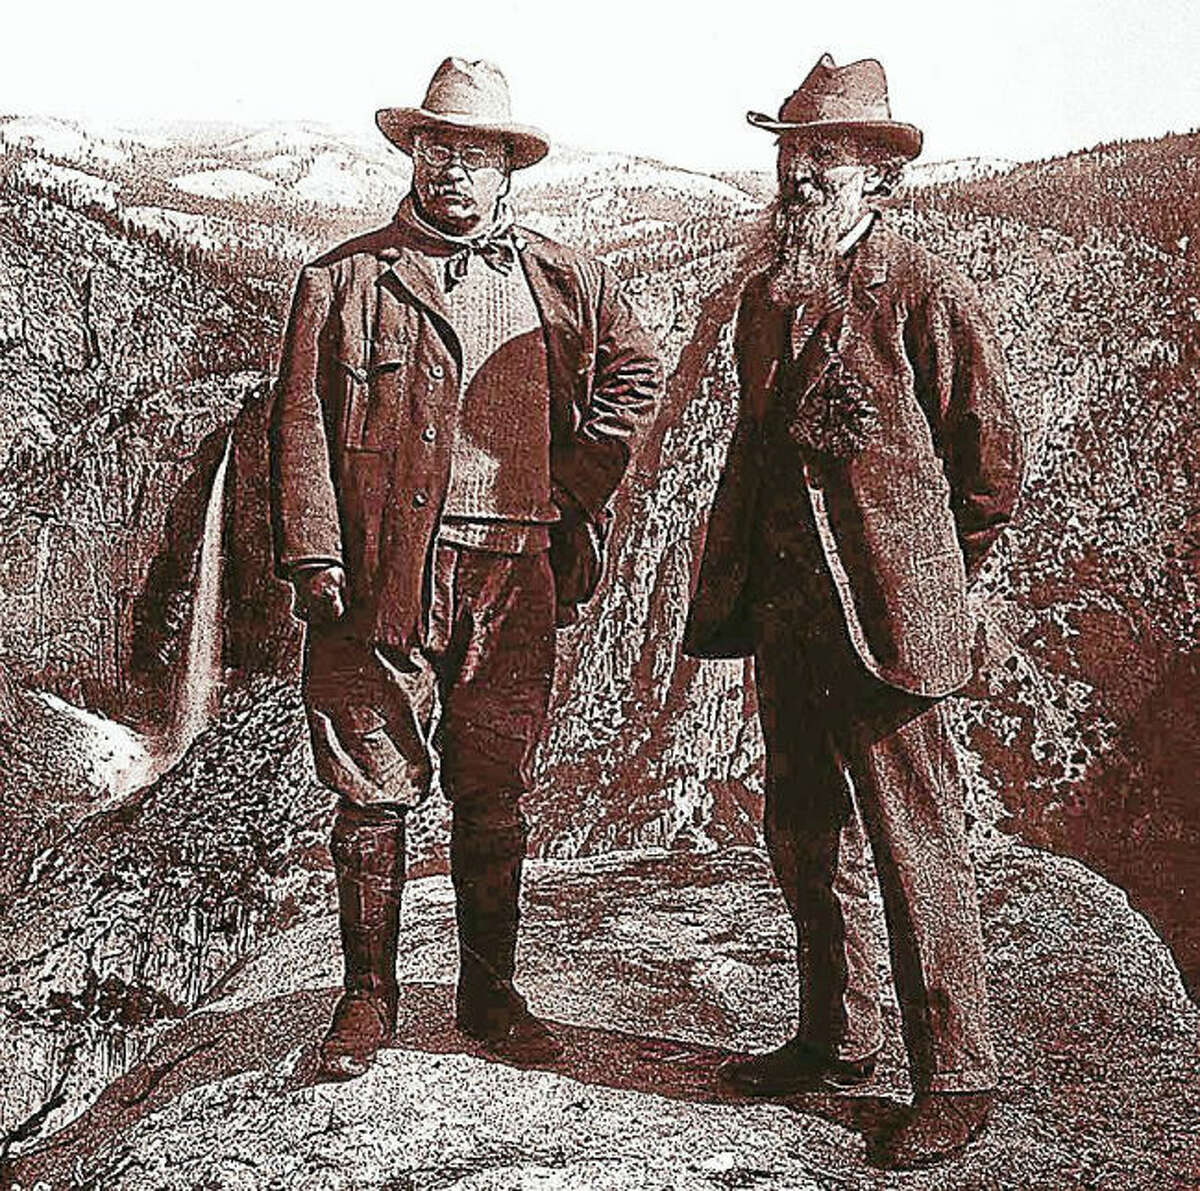 A vintage photo featuring President Theodore Roosevelt, who established the National Park system.